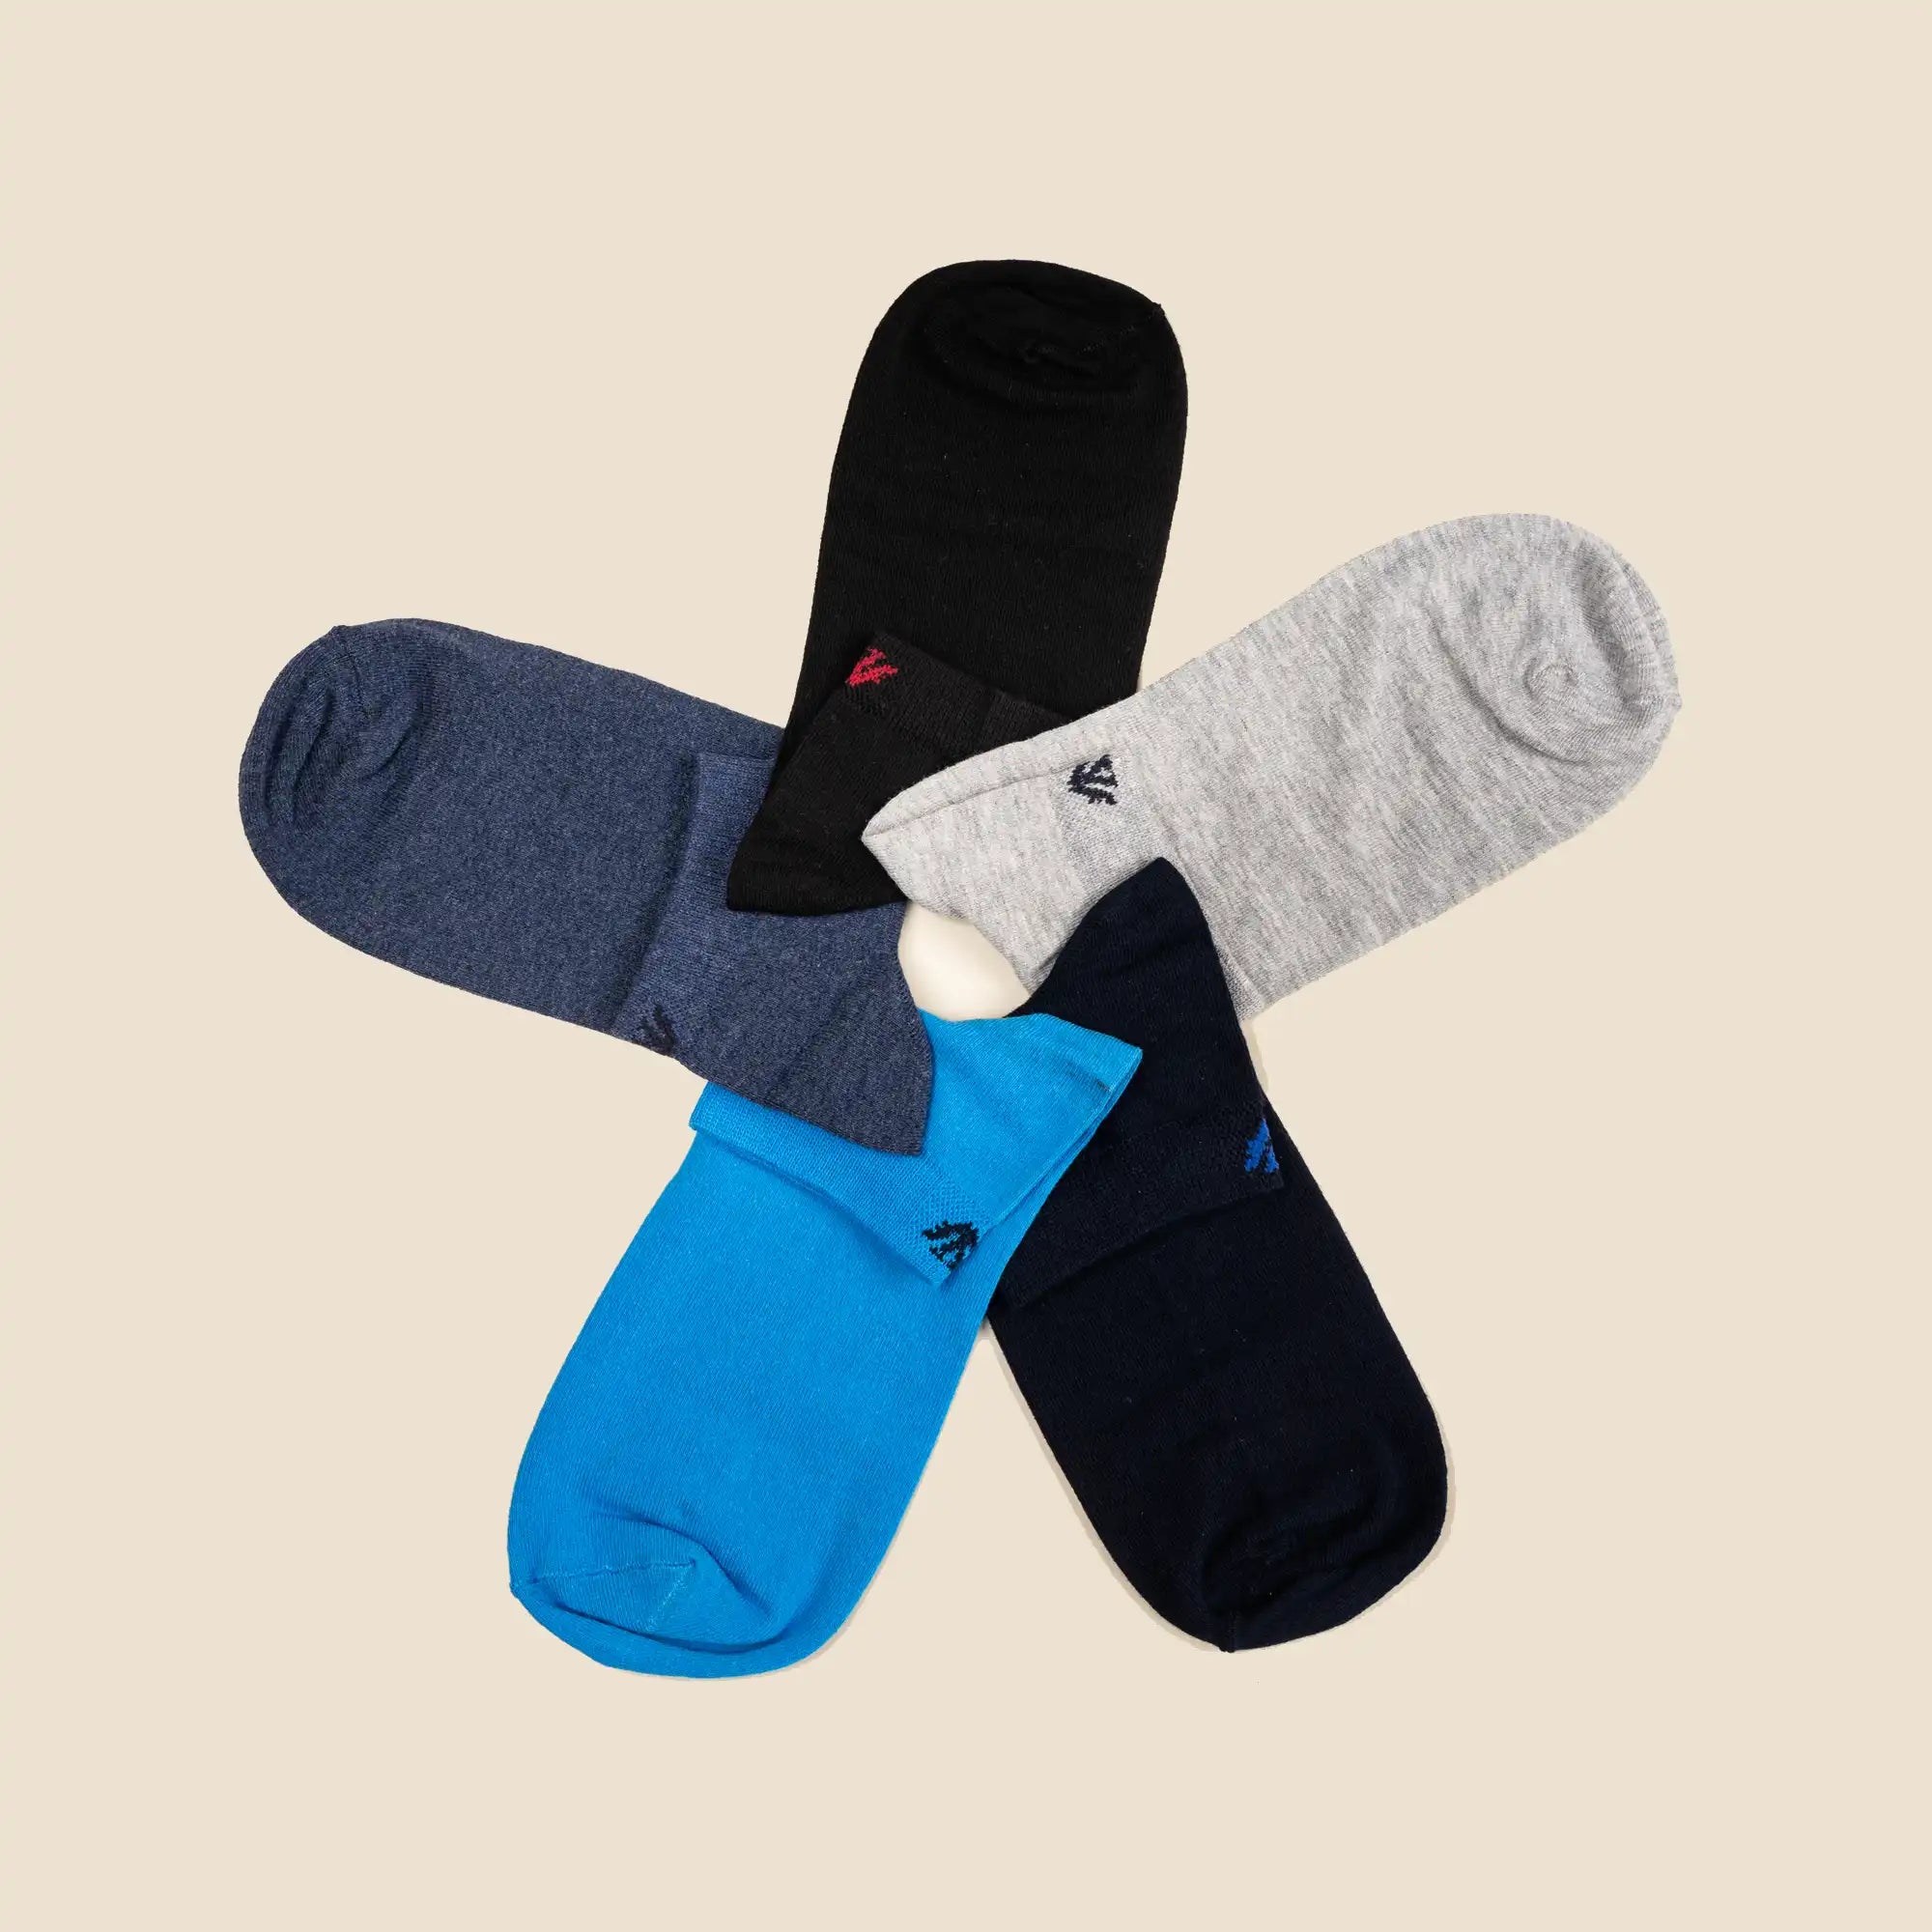 Young Wings Men's Multi Colour Cotton Fabric Solid Low Ankle Length Socks - Pack of 5, Style no. 1400-M1